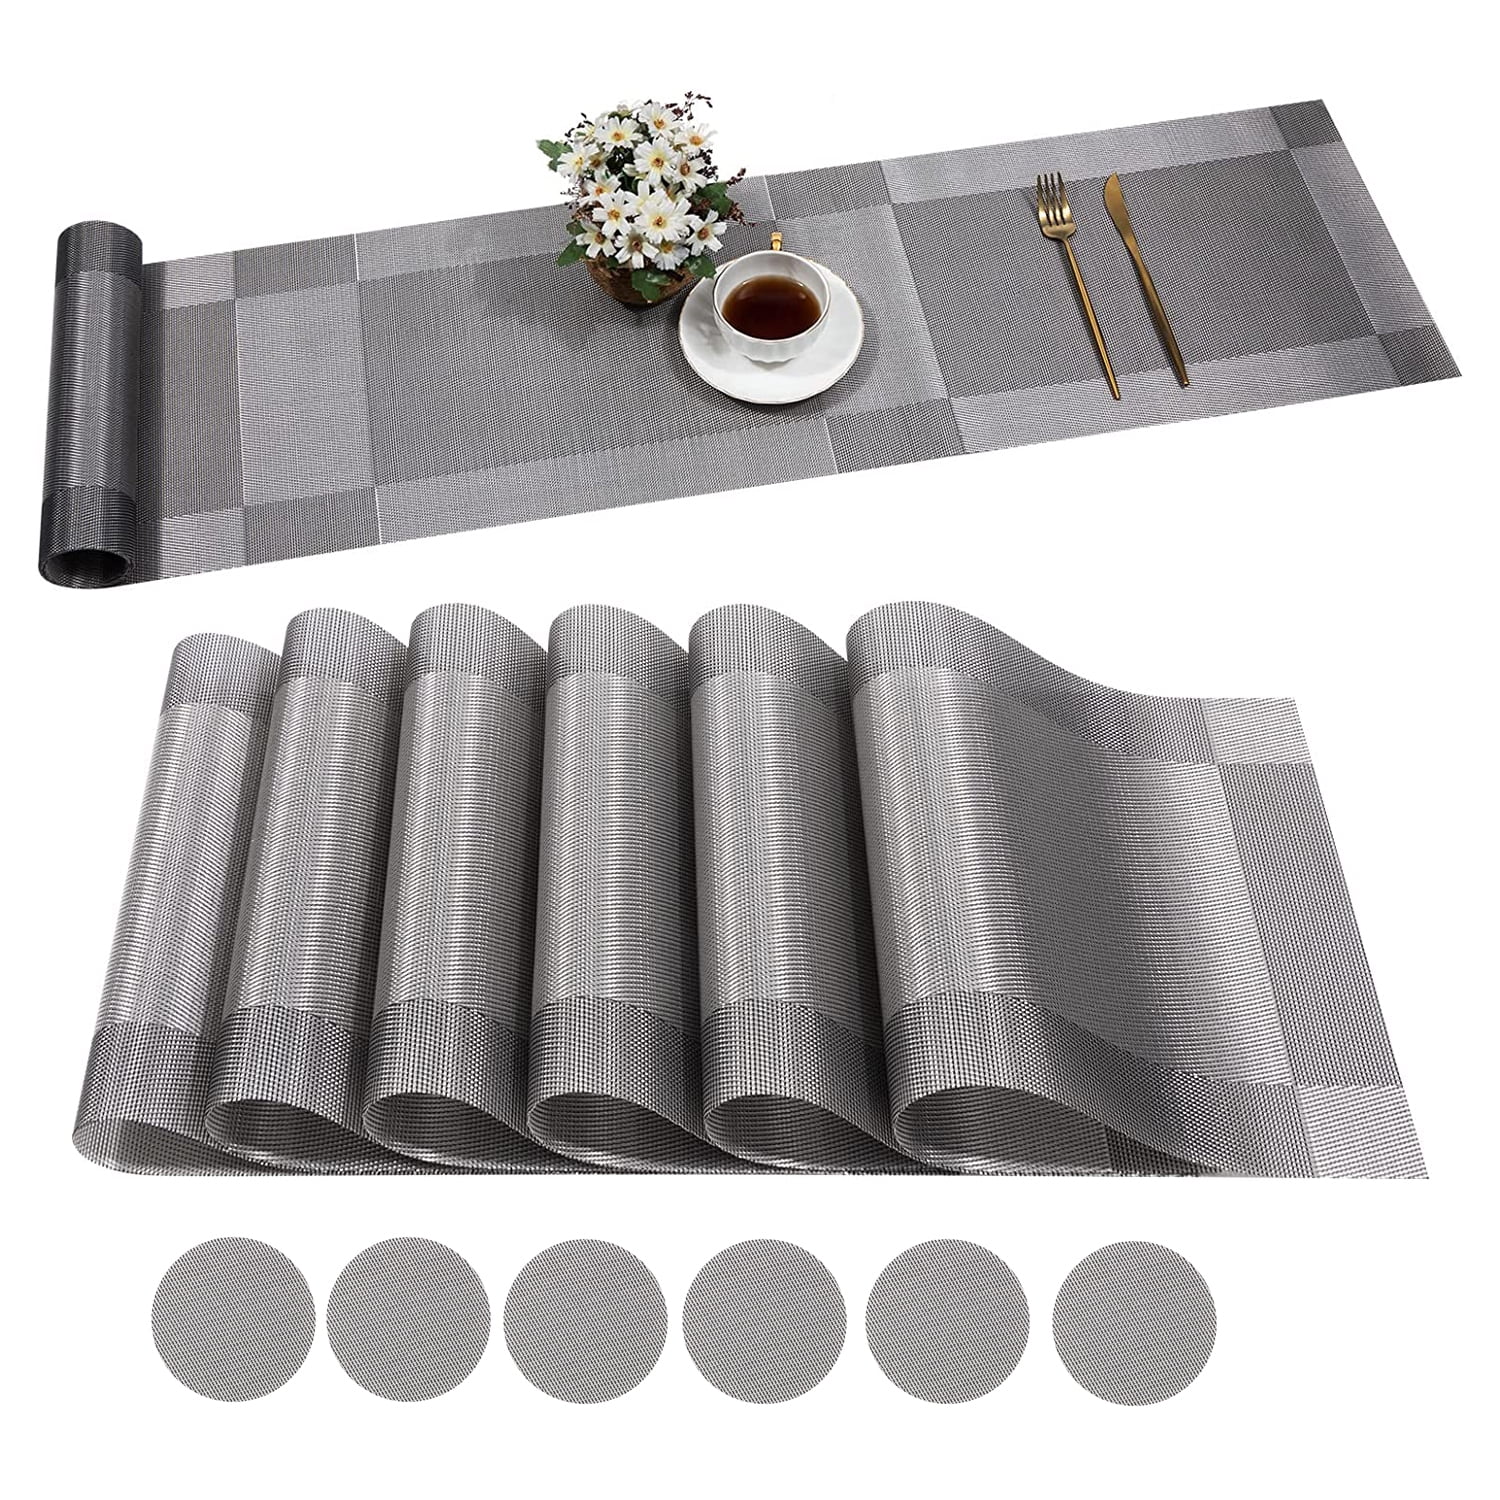 Deep Grey Famibay PVC Placemats and Coasters Set of 6 Washable Woven Vinyl Dining Table Mats and Coasters 